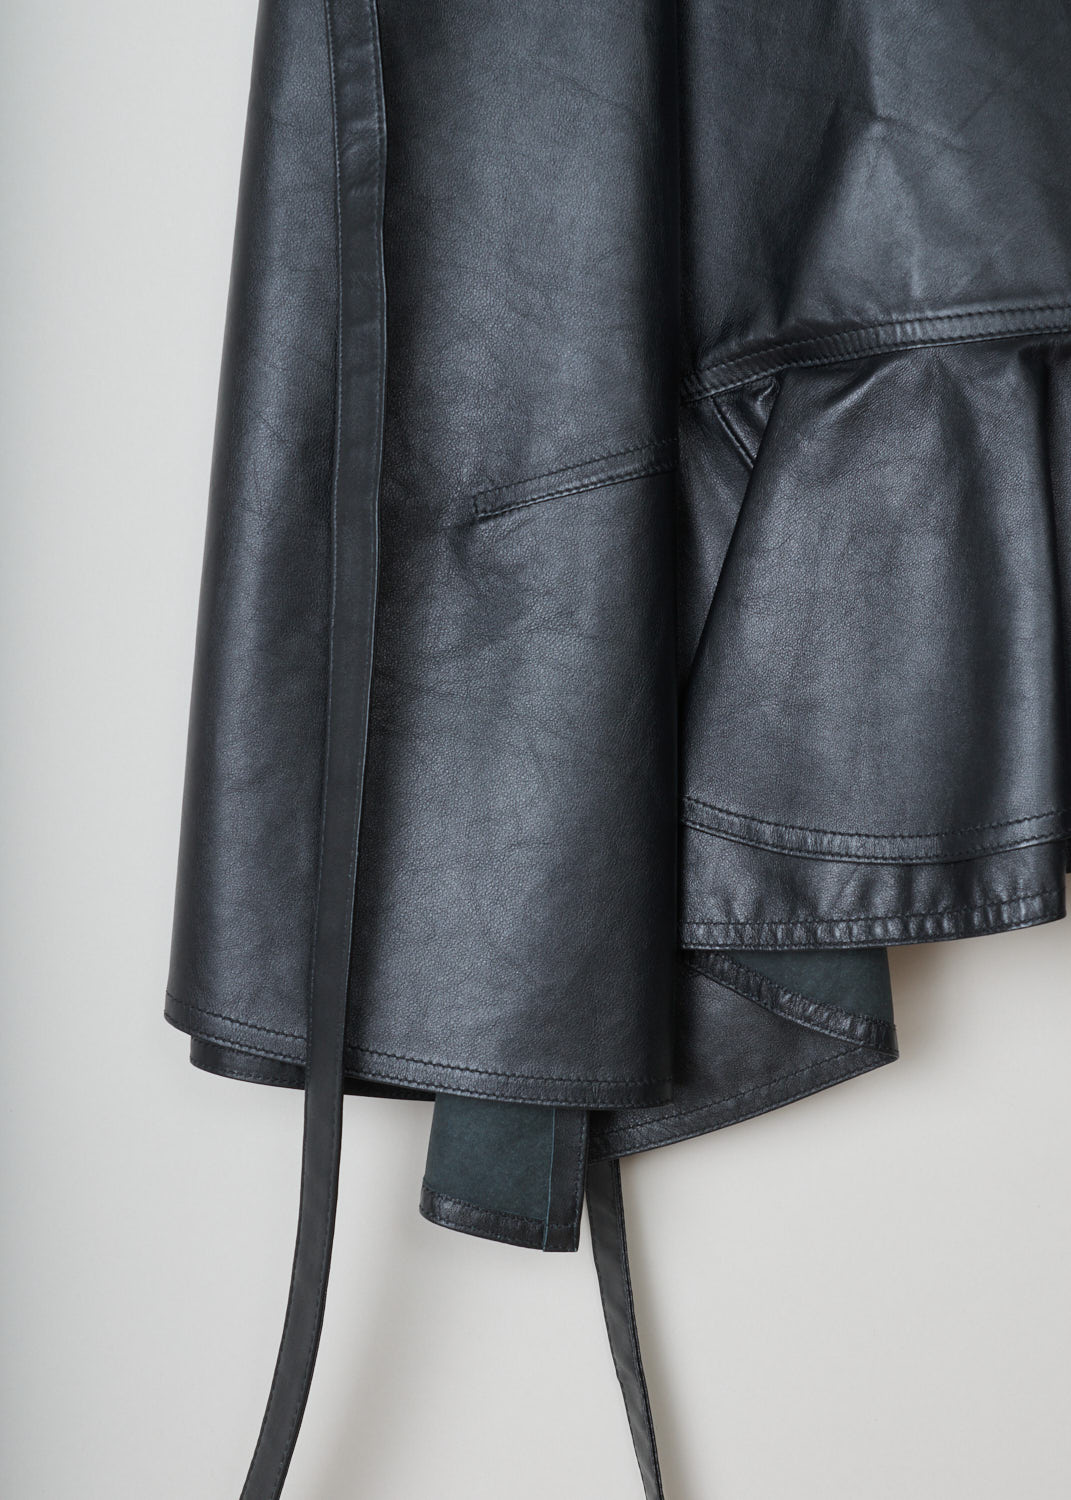 CÃ©line, Asymmetrical black leather wrap skirt, 045A_22081_ONO_C01, black, detail, Wrap skirt crafted in calf leather, the softest kind of leather. This model features a backing button on the inside. Beside that, it has two leather ribbons that can be used as fastening option, or can be tied in various decorative knots. Furthermore, this model has concealed pockets on the side seam.